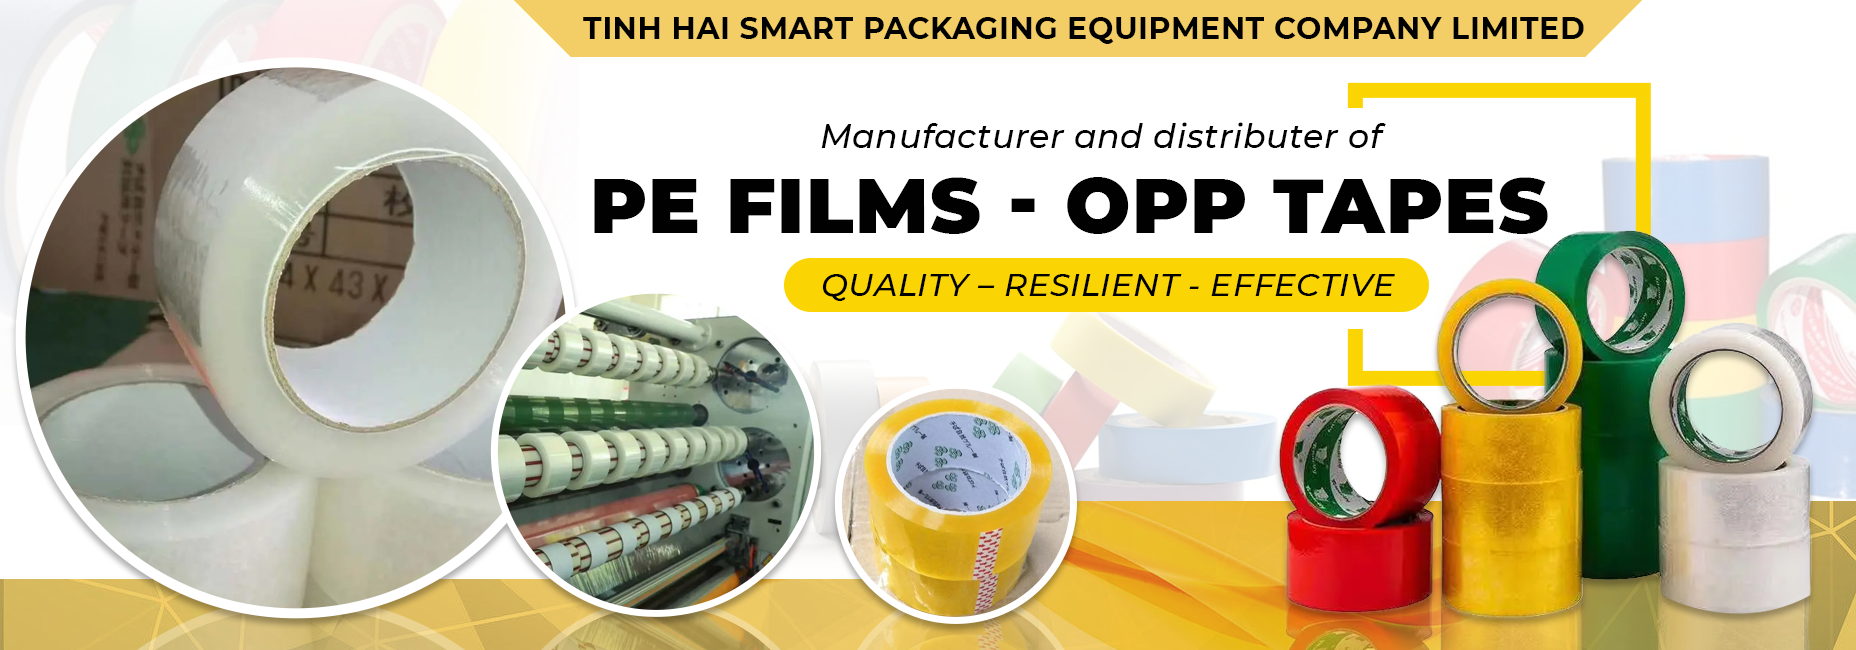 TINH HAI SMART PACKAGING EQUIPMENT COMPANY LIMITED